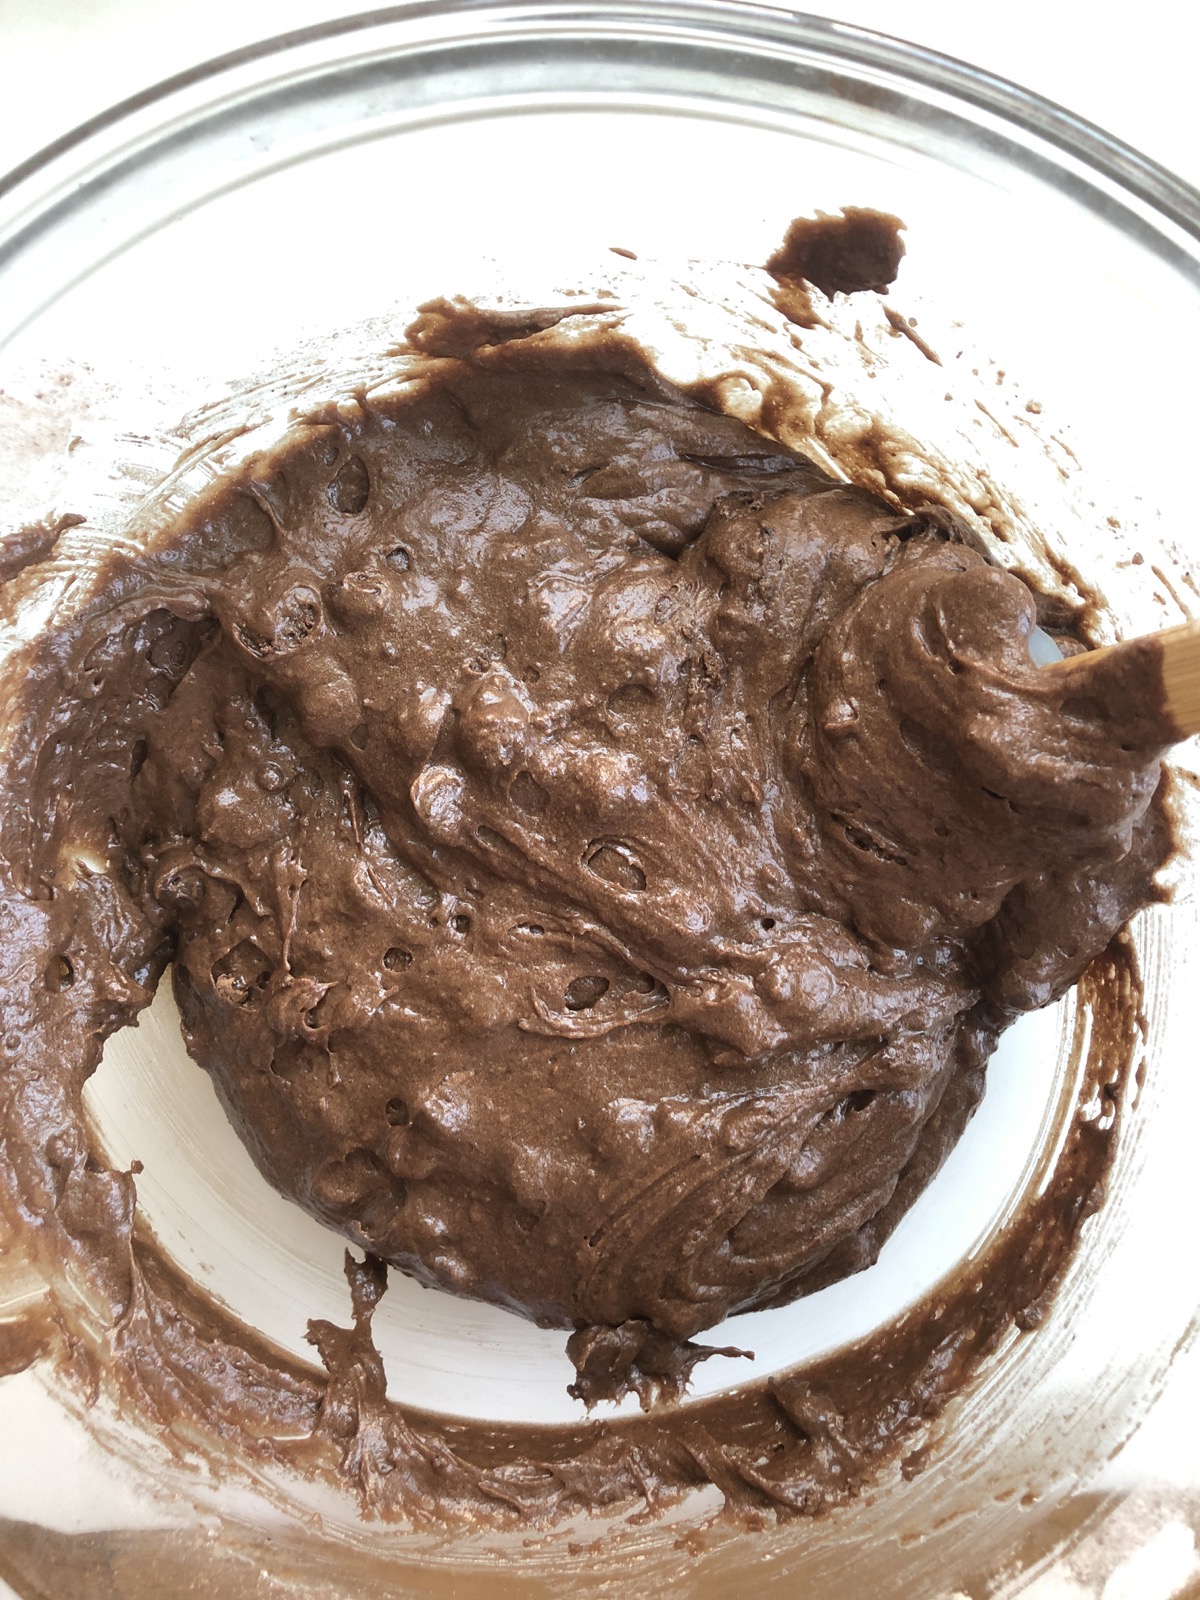 Finished batter for Chocolate Fudge Cake Doughnuts in bowl.